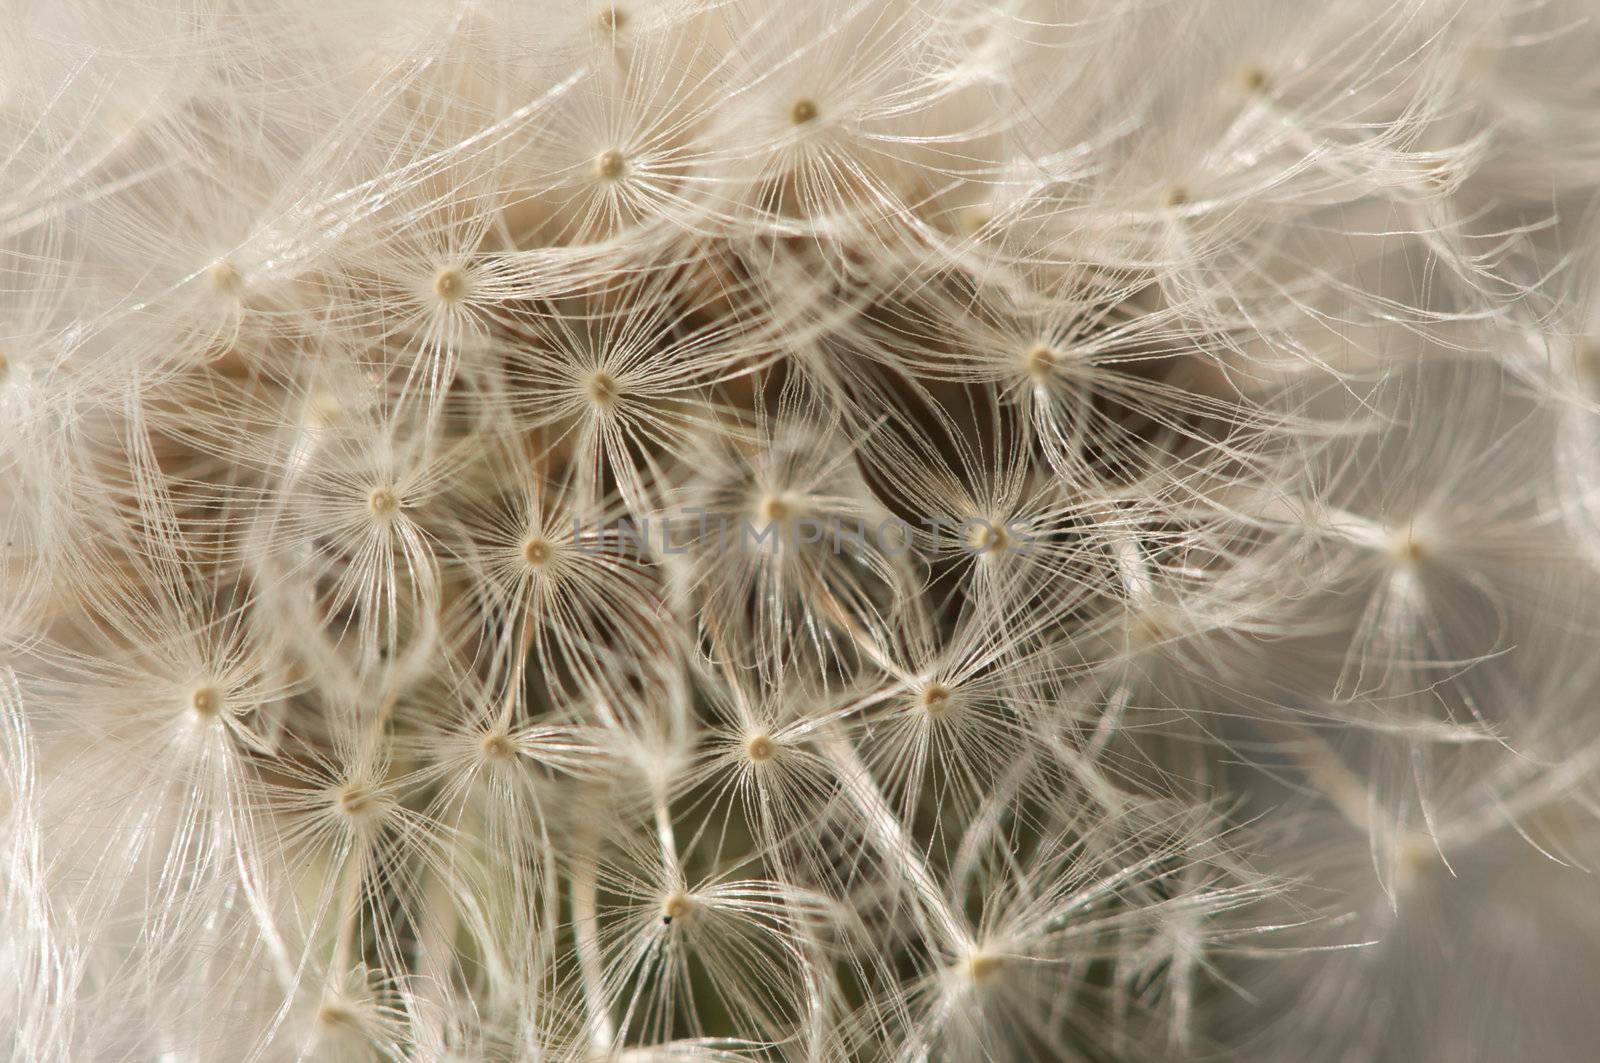 Macro Dandelion Blossom by Feverpitched